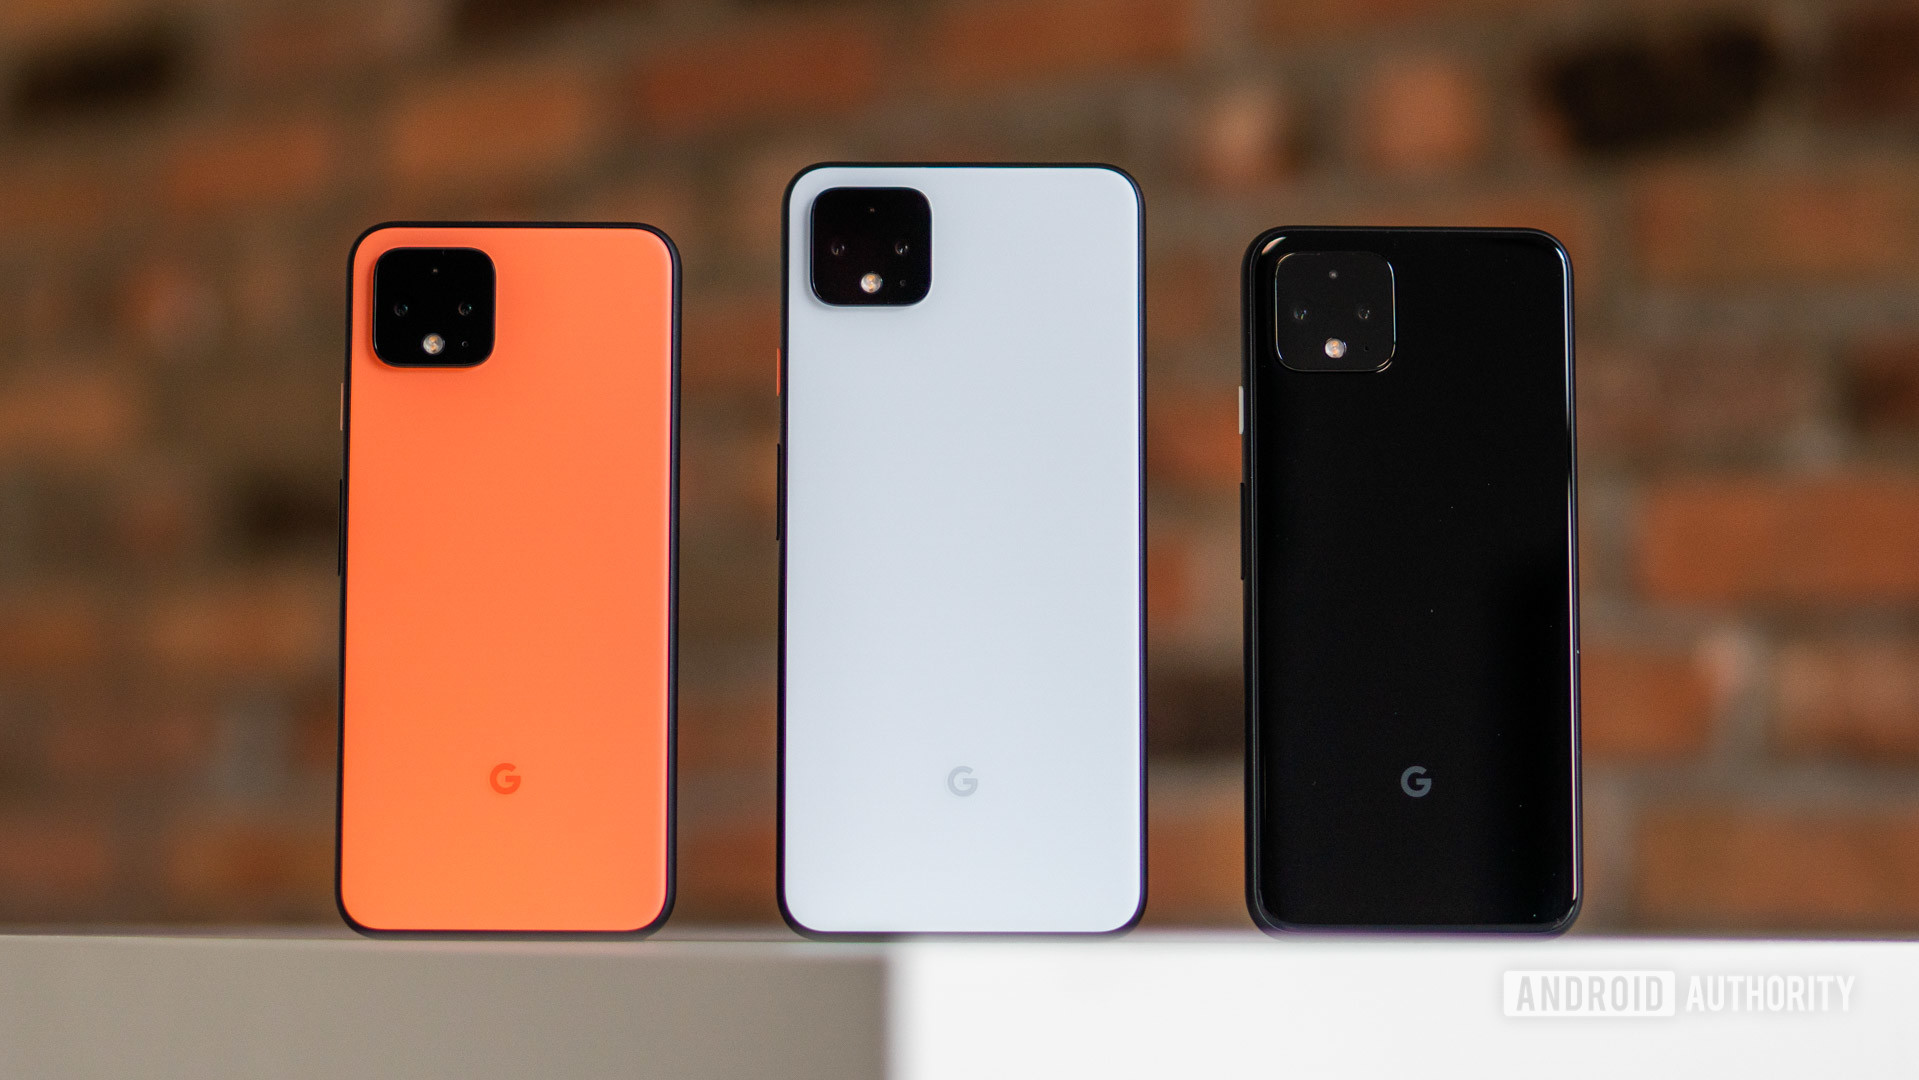 The Google Pixel 4 would be a prime target for an ultra low power mode.